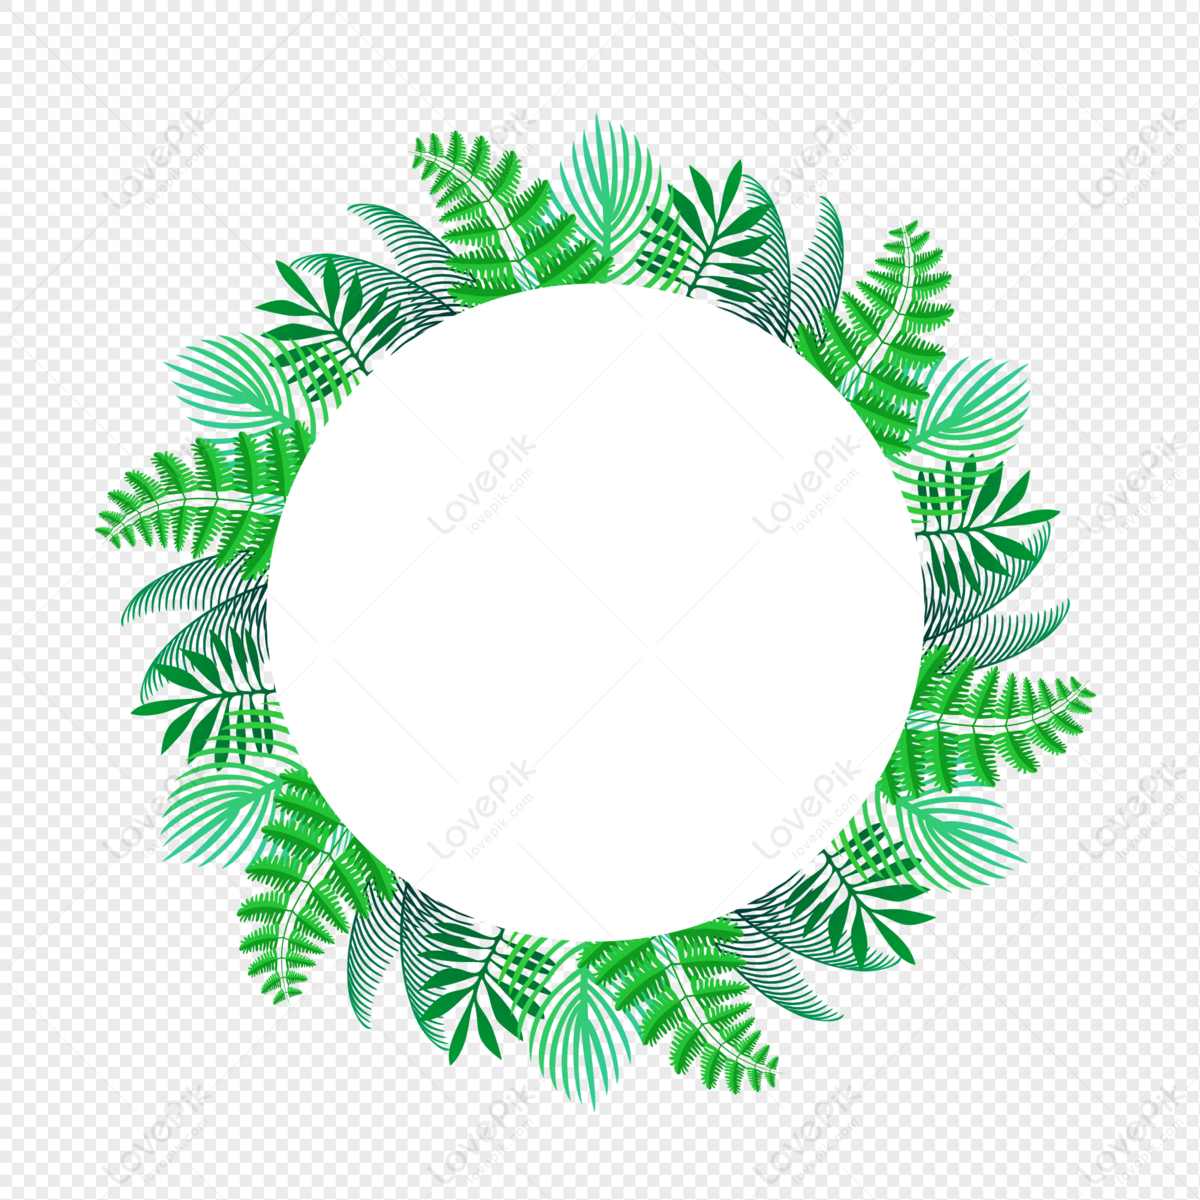 Leaf Border PNG Hd Transparent Image And Clipart Image For Free ...